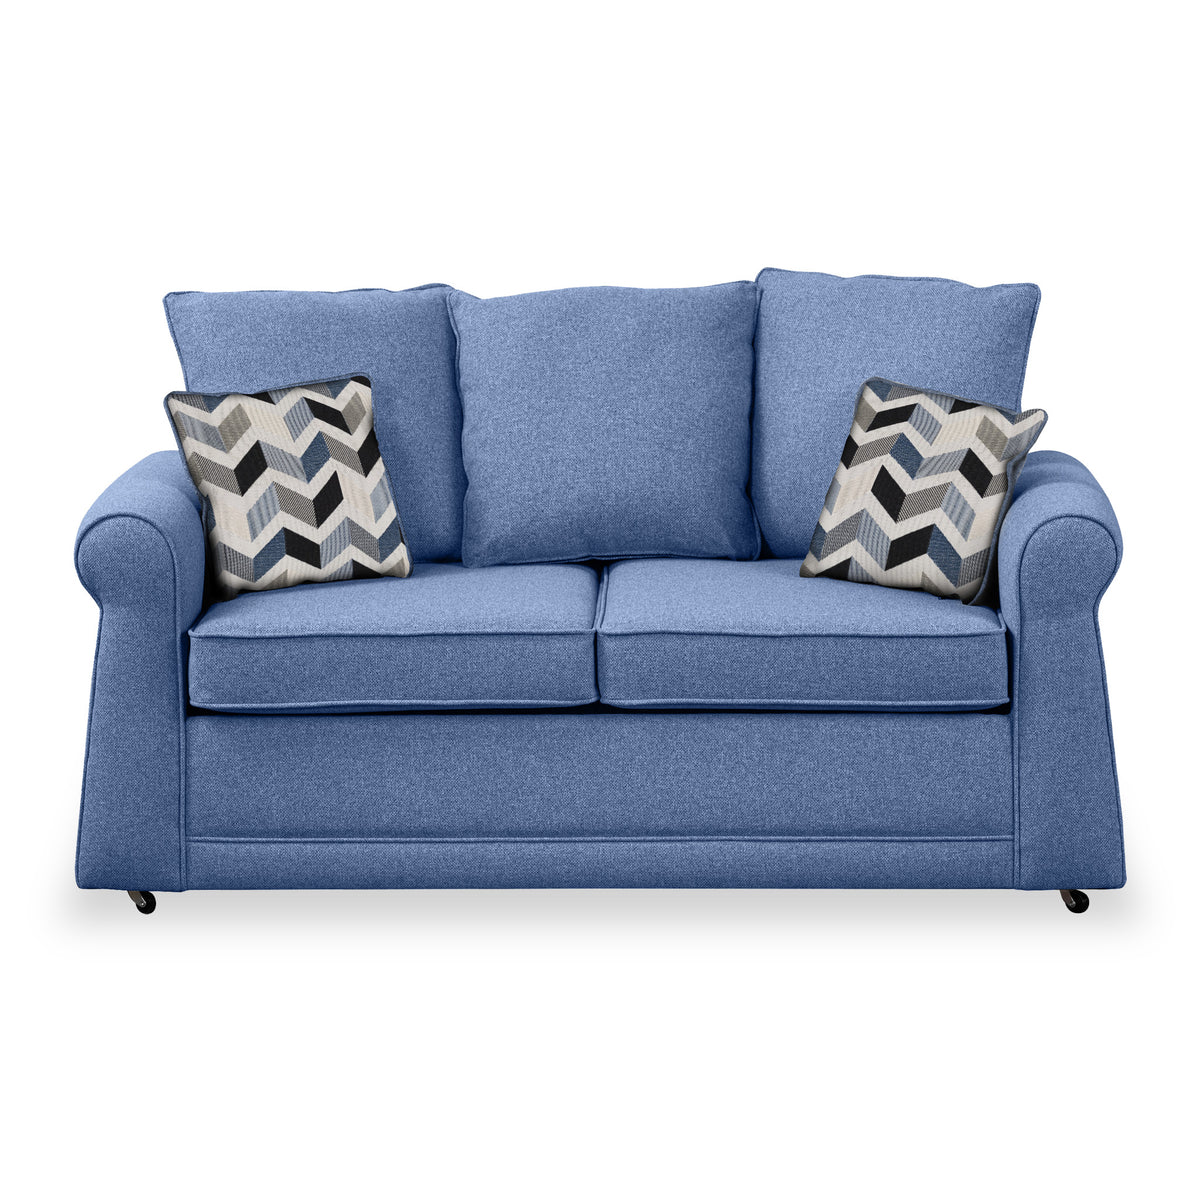 Broughton Denim Faux Linen 2 Seater Sofabed with Denim Scatter Cushions from Roseland Furniture